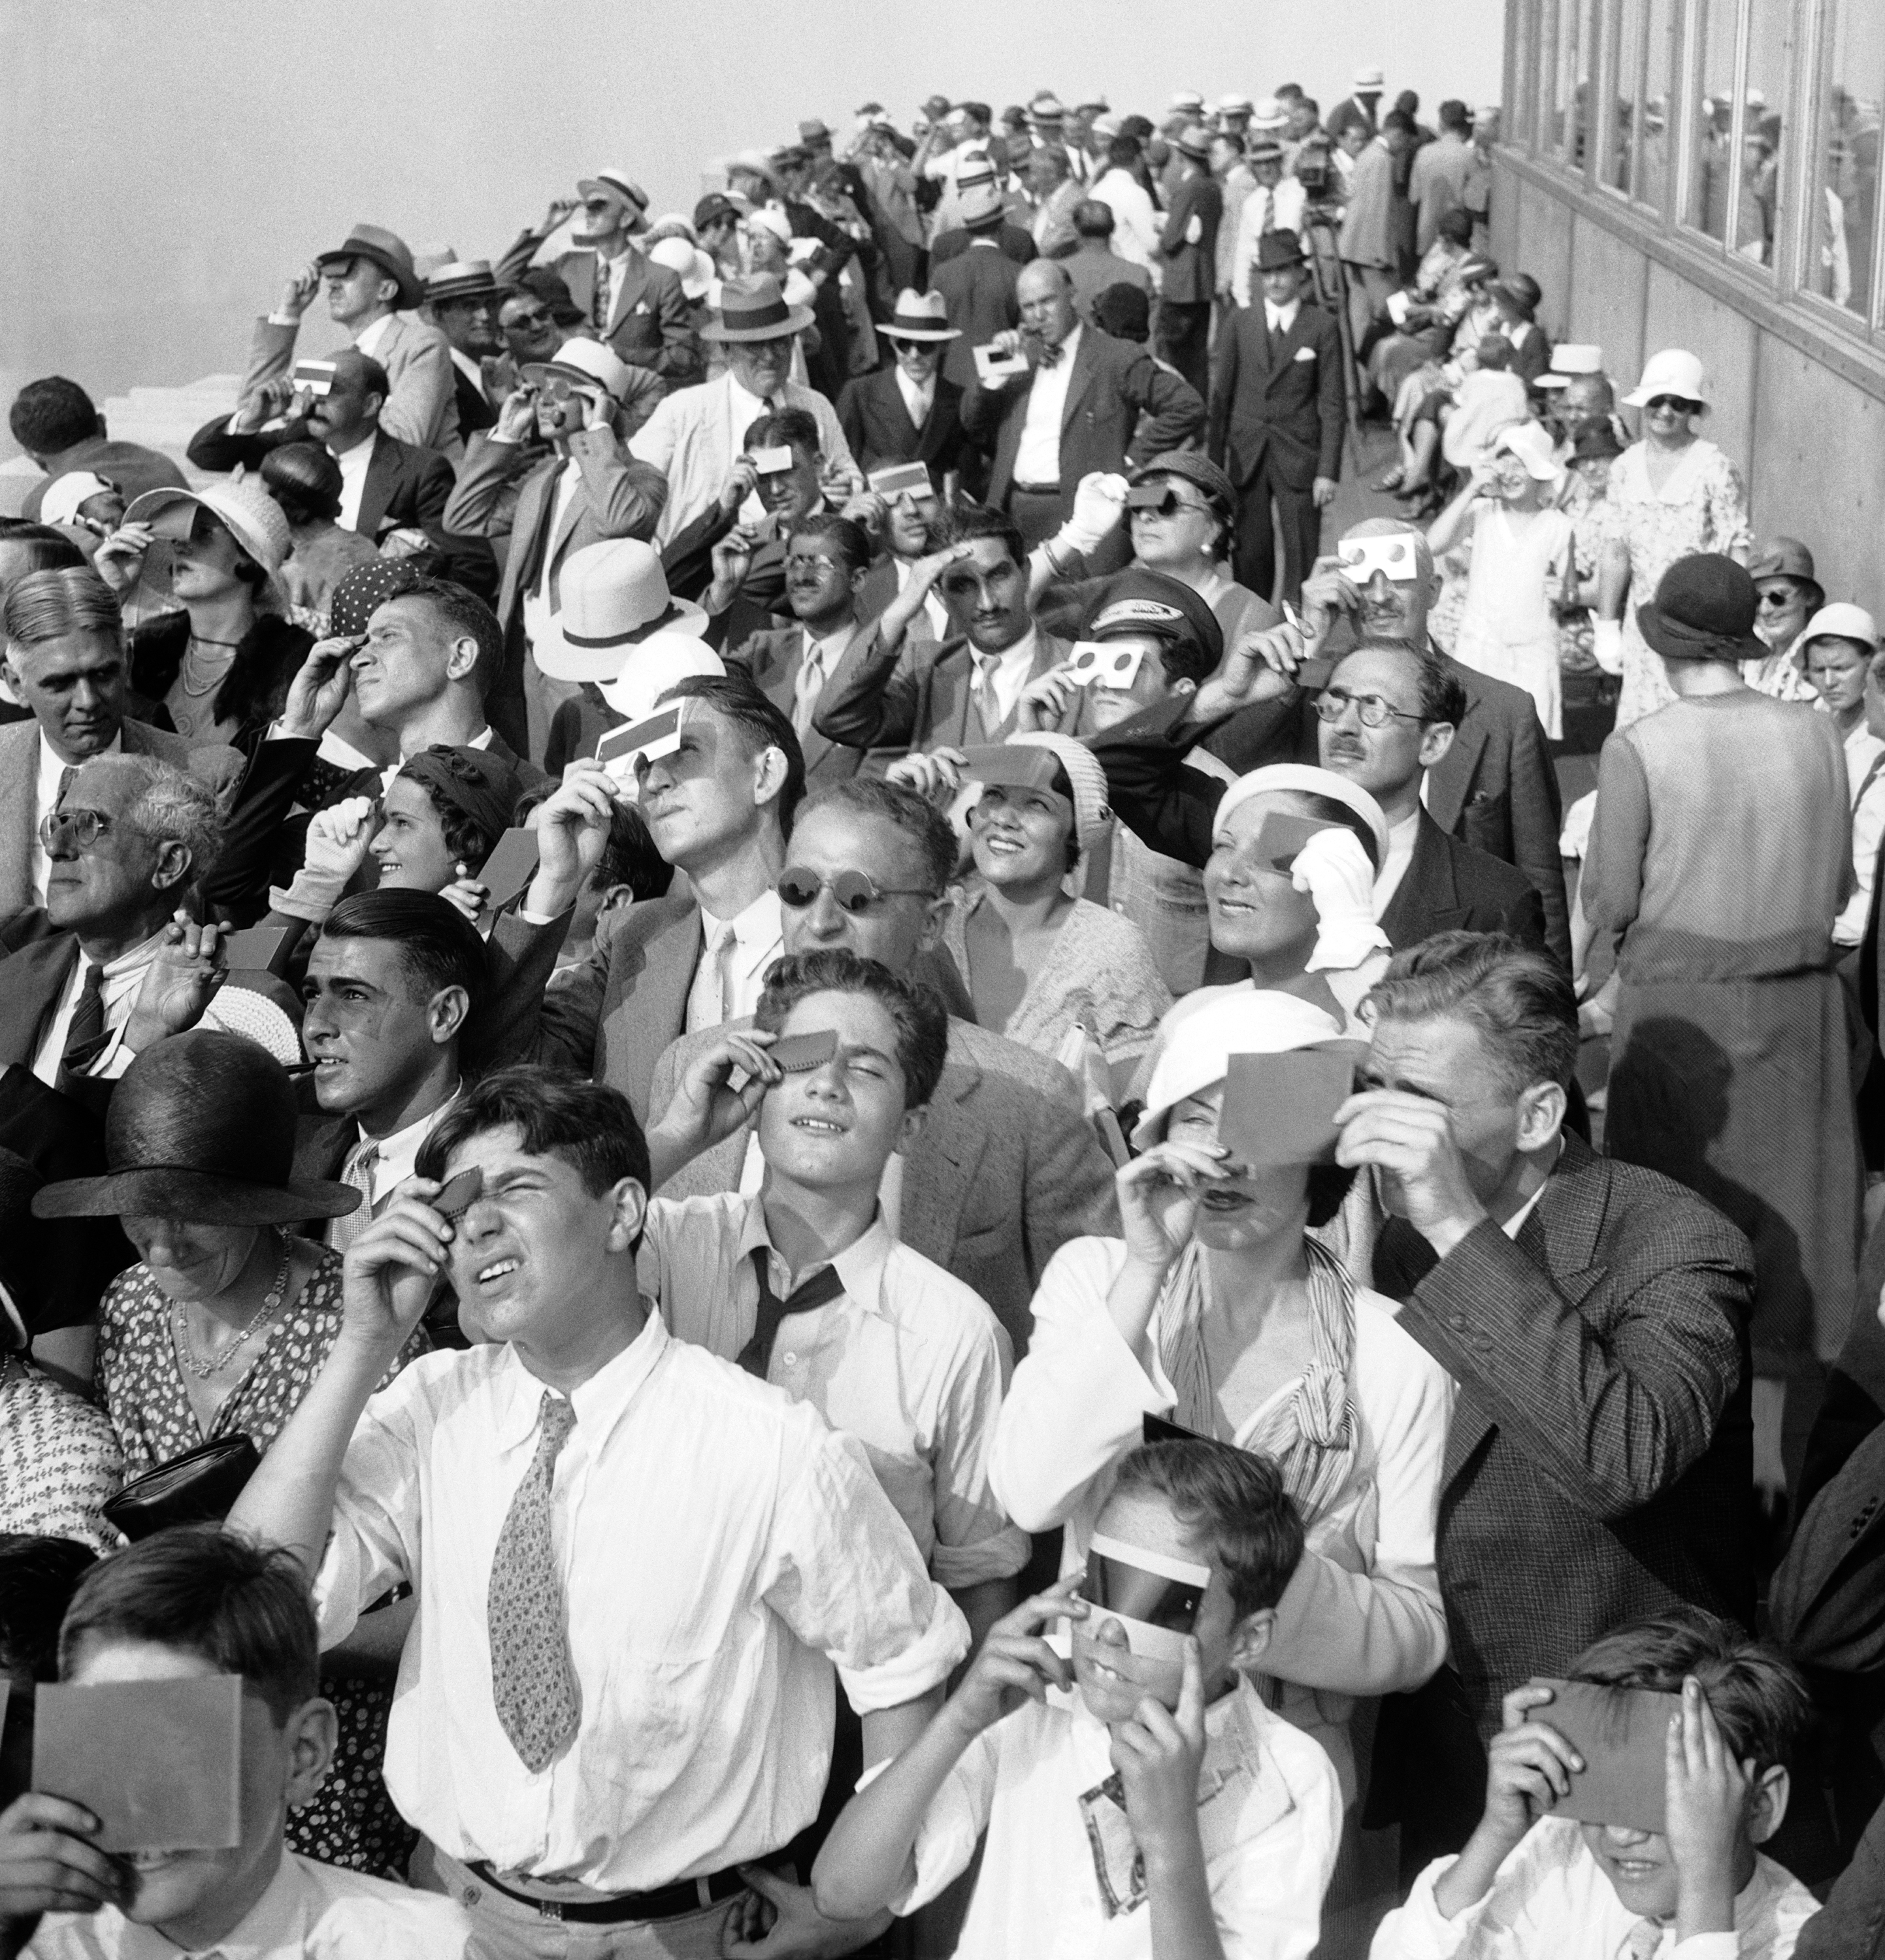 Eclipse watchers squint through protective film as they view a partial eclipse of the sun from the top deck of New York's Empire State Building Aug. 31, 1932. (AP)